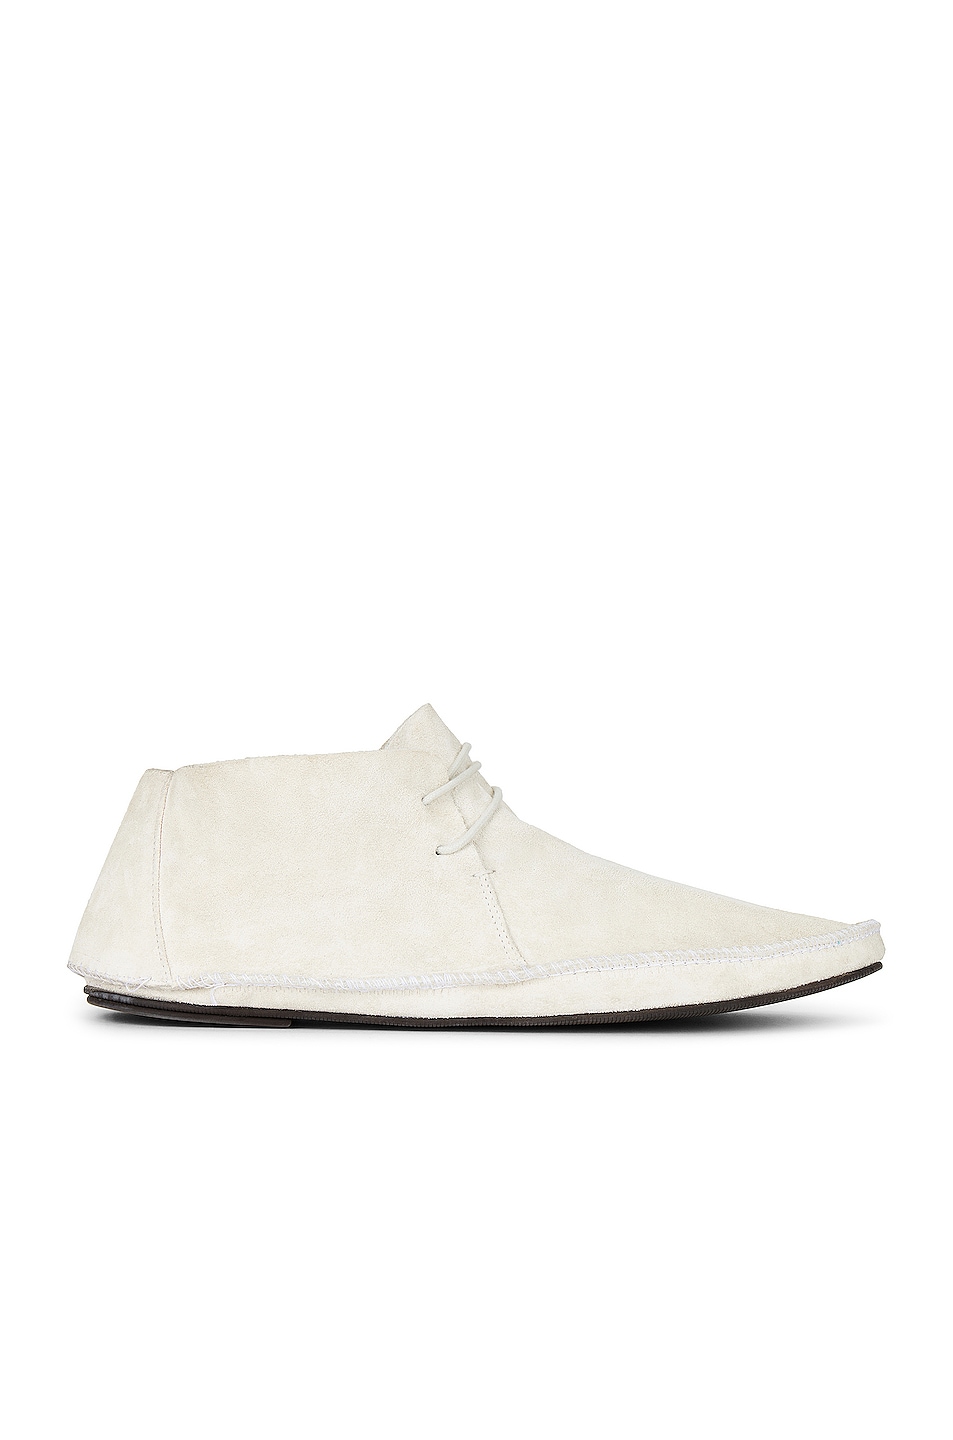 Image 1 of The Row Tyler Lace Up Boot in White Smoke